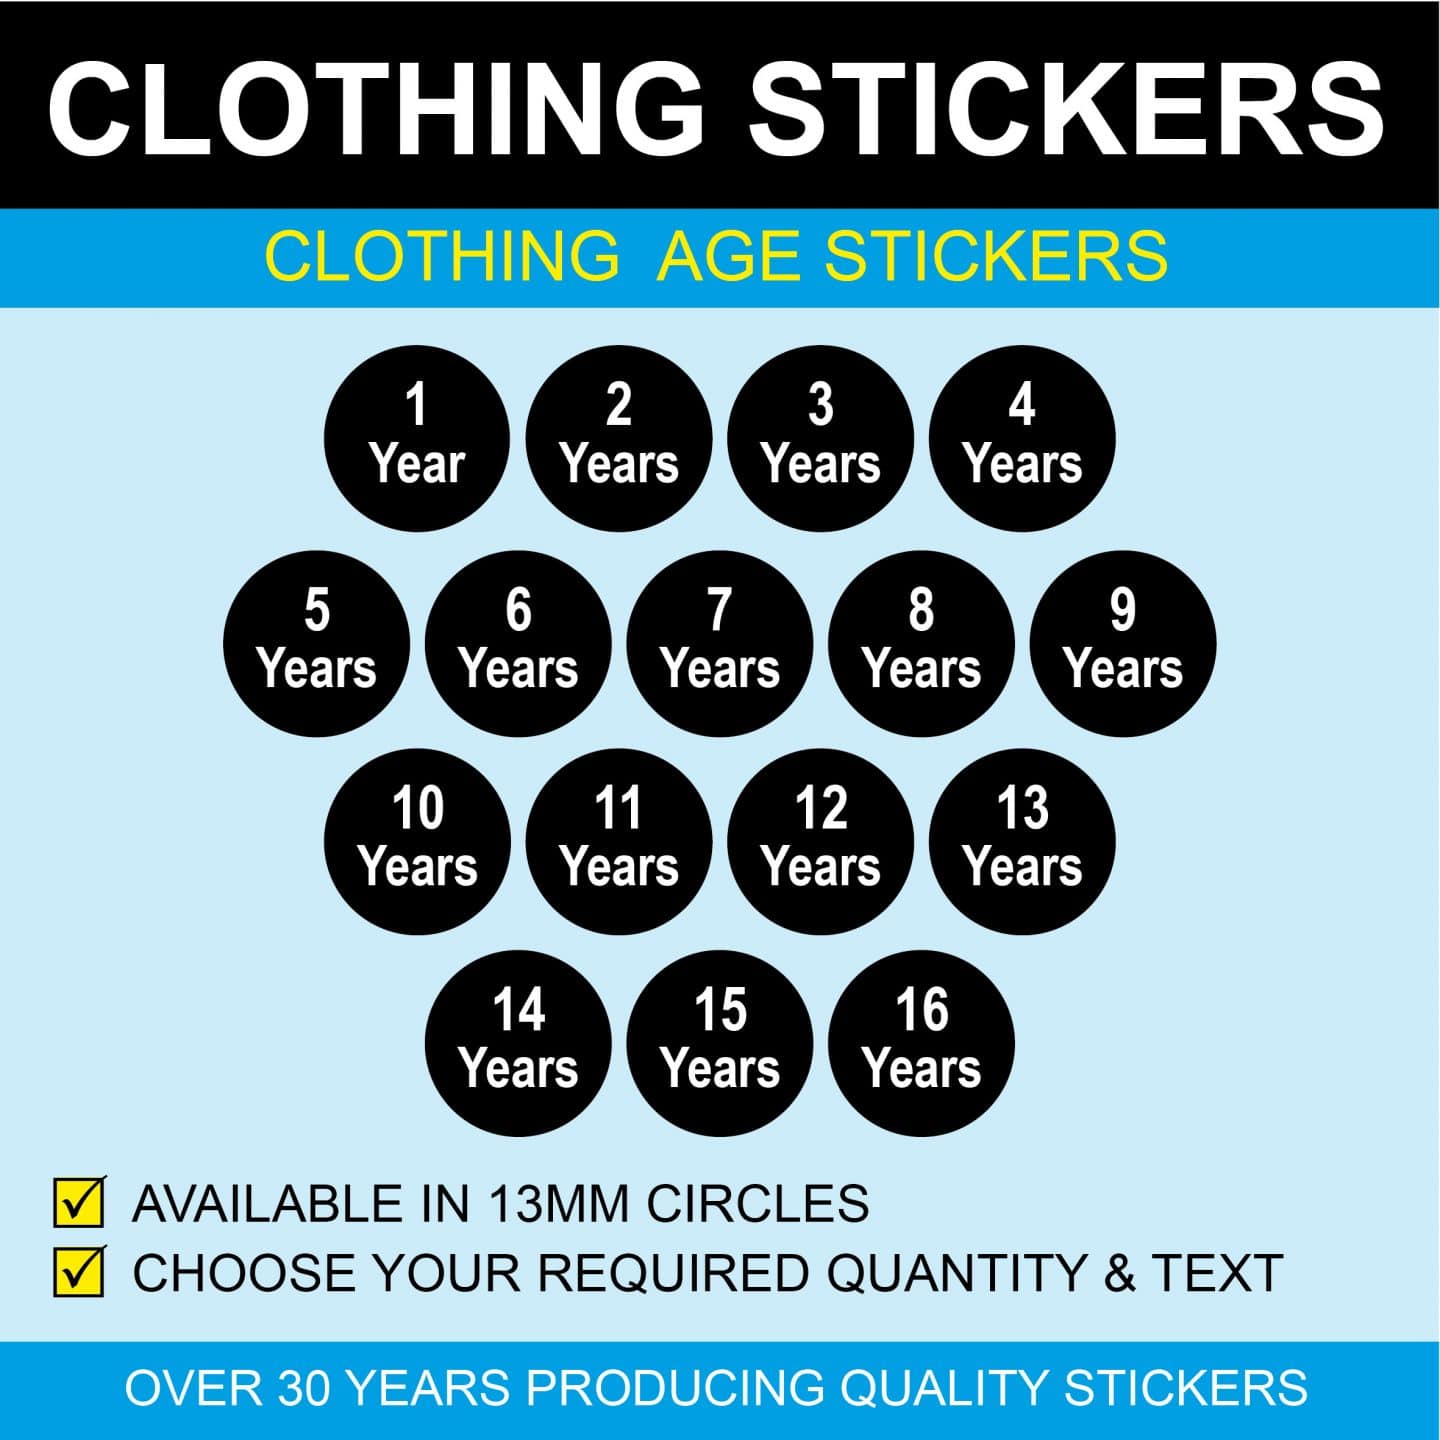 13mm Children's Clothes Size Stickers